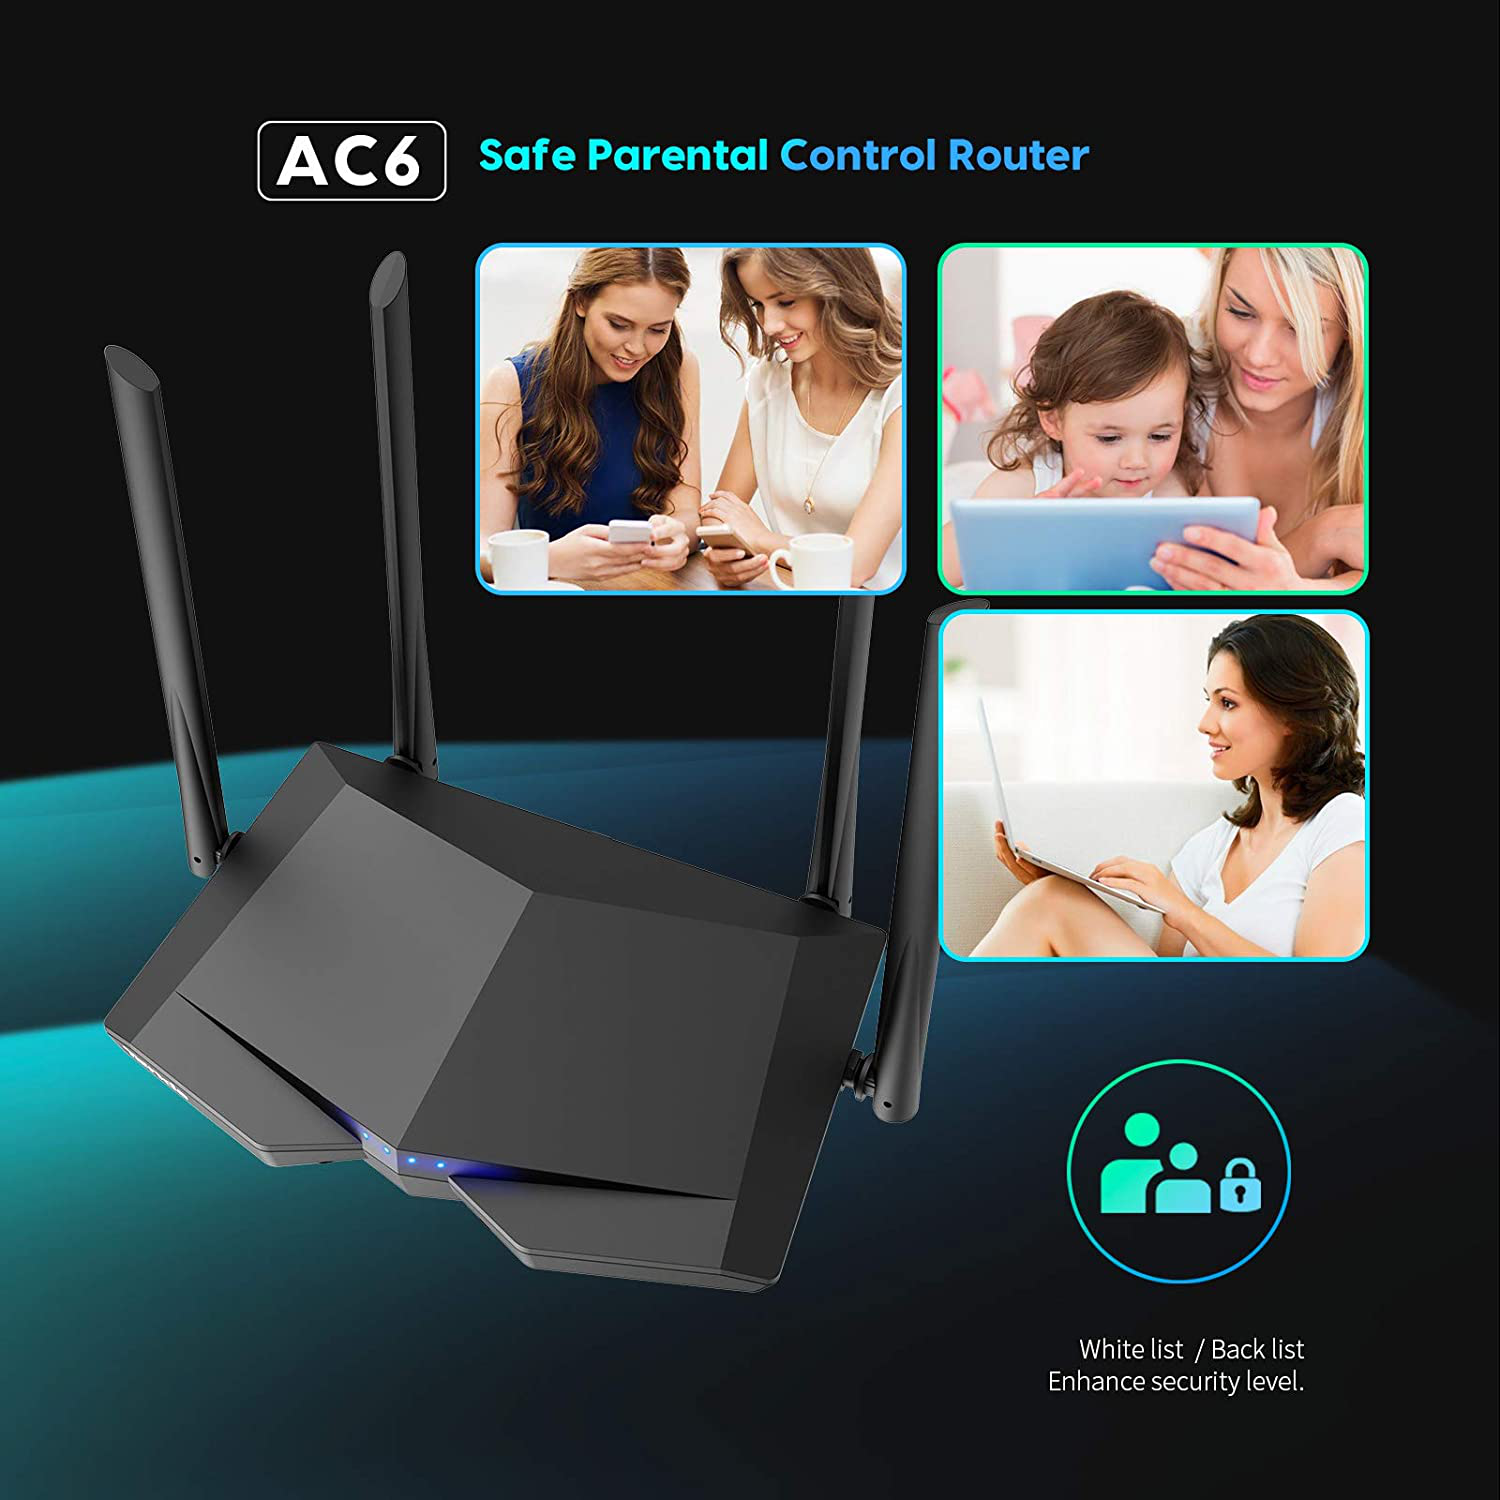 Dual Band WiFi Router, High Speed Wireless Internet Router with Smart App, MU-MIMO for Home